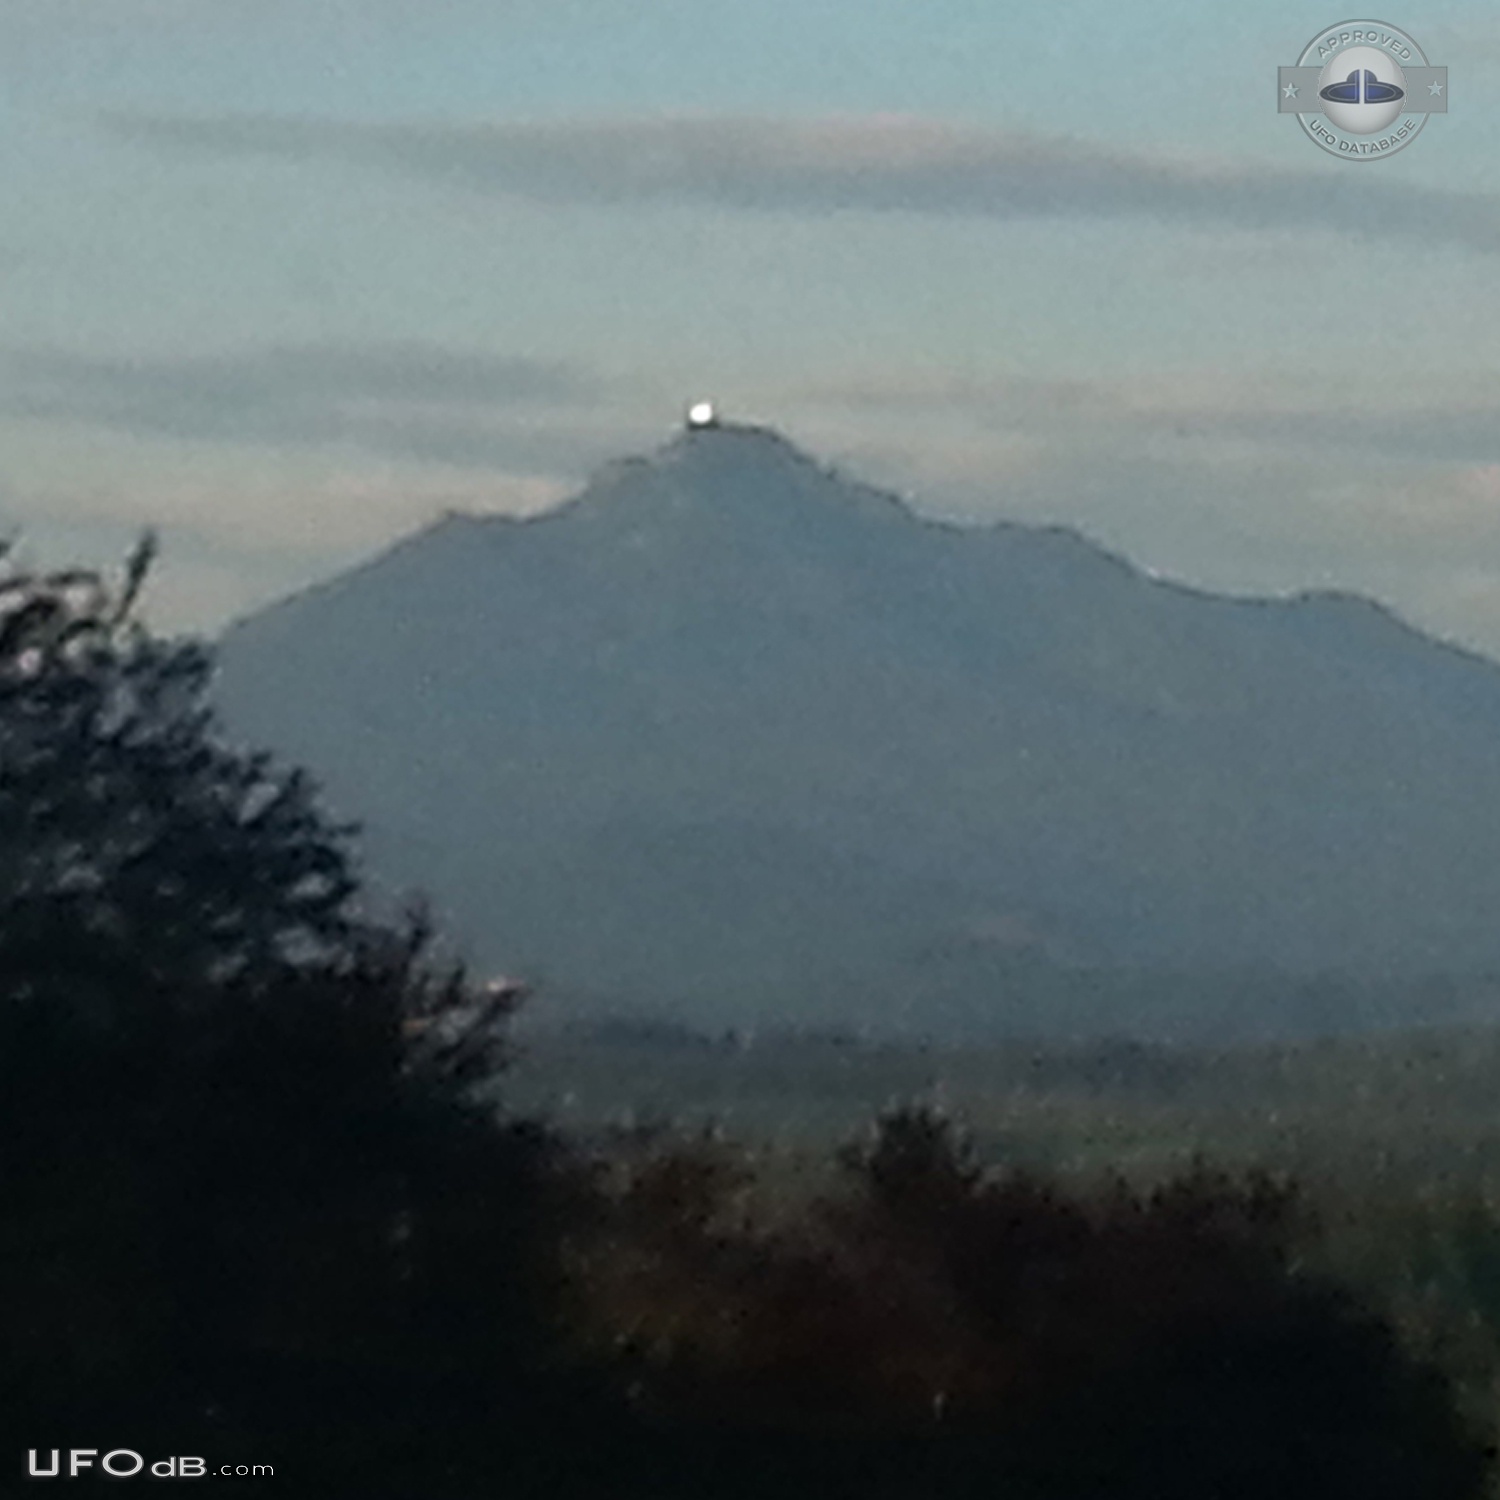 Looked to mountain. saw gigantic hovering ufo - Lake Stevens USA 2015 UFO Picture #703-3